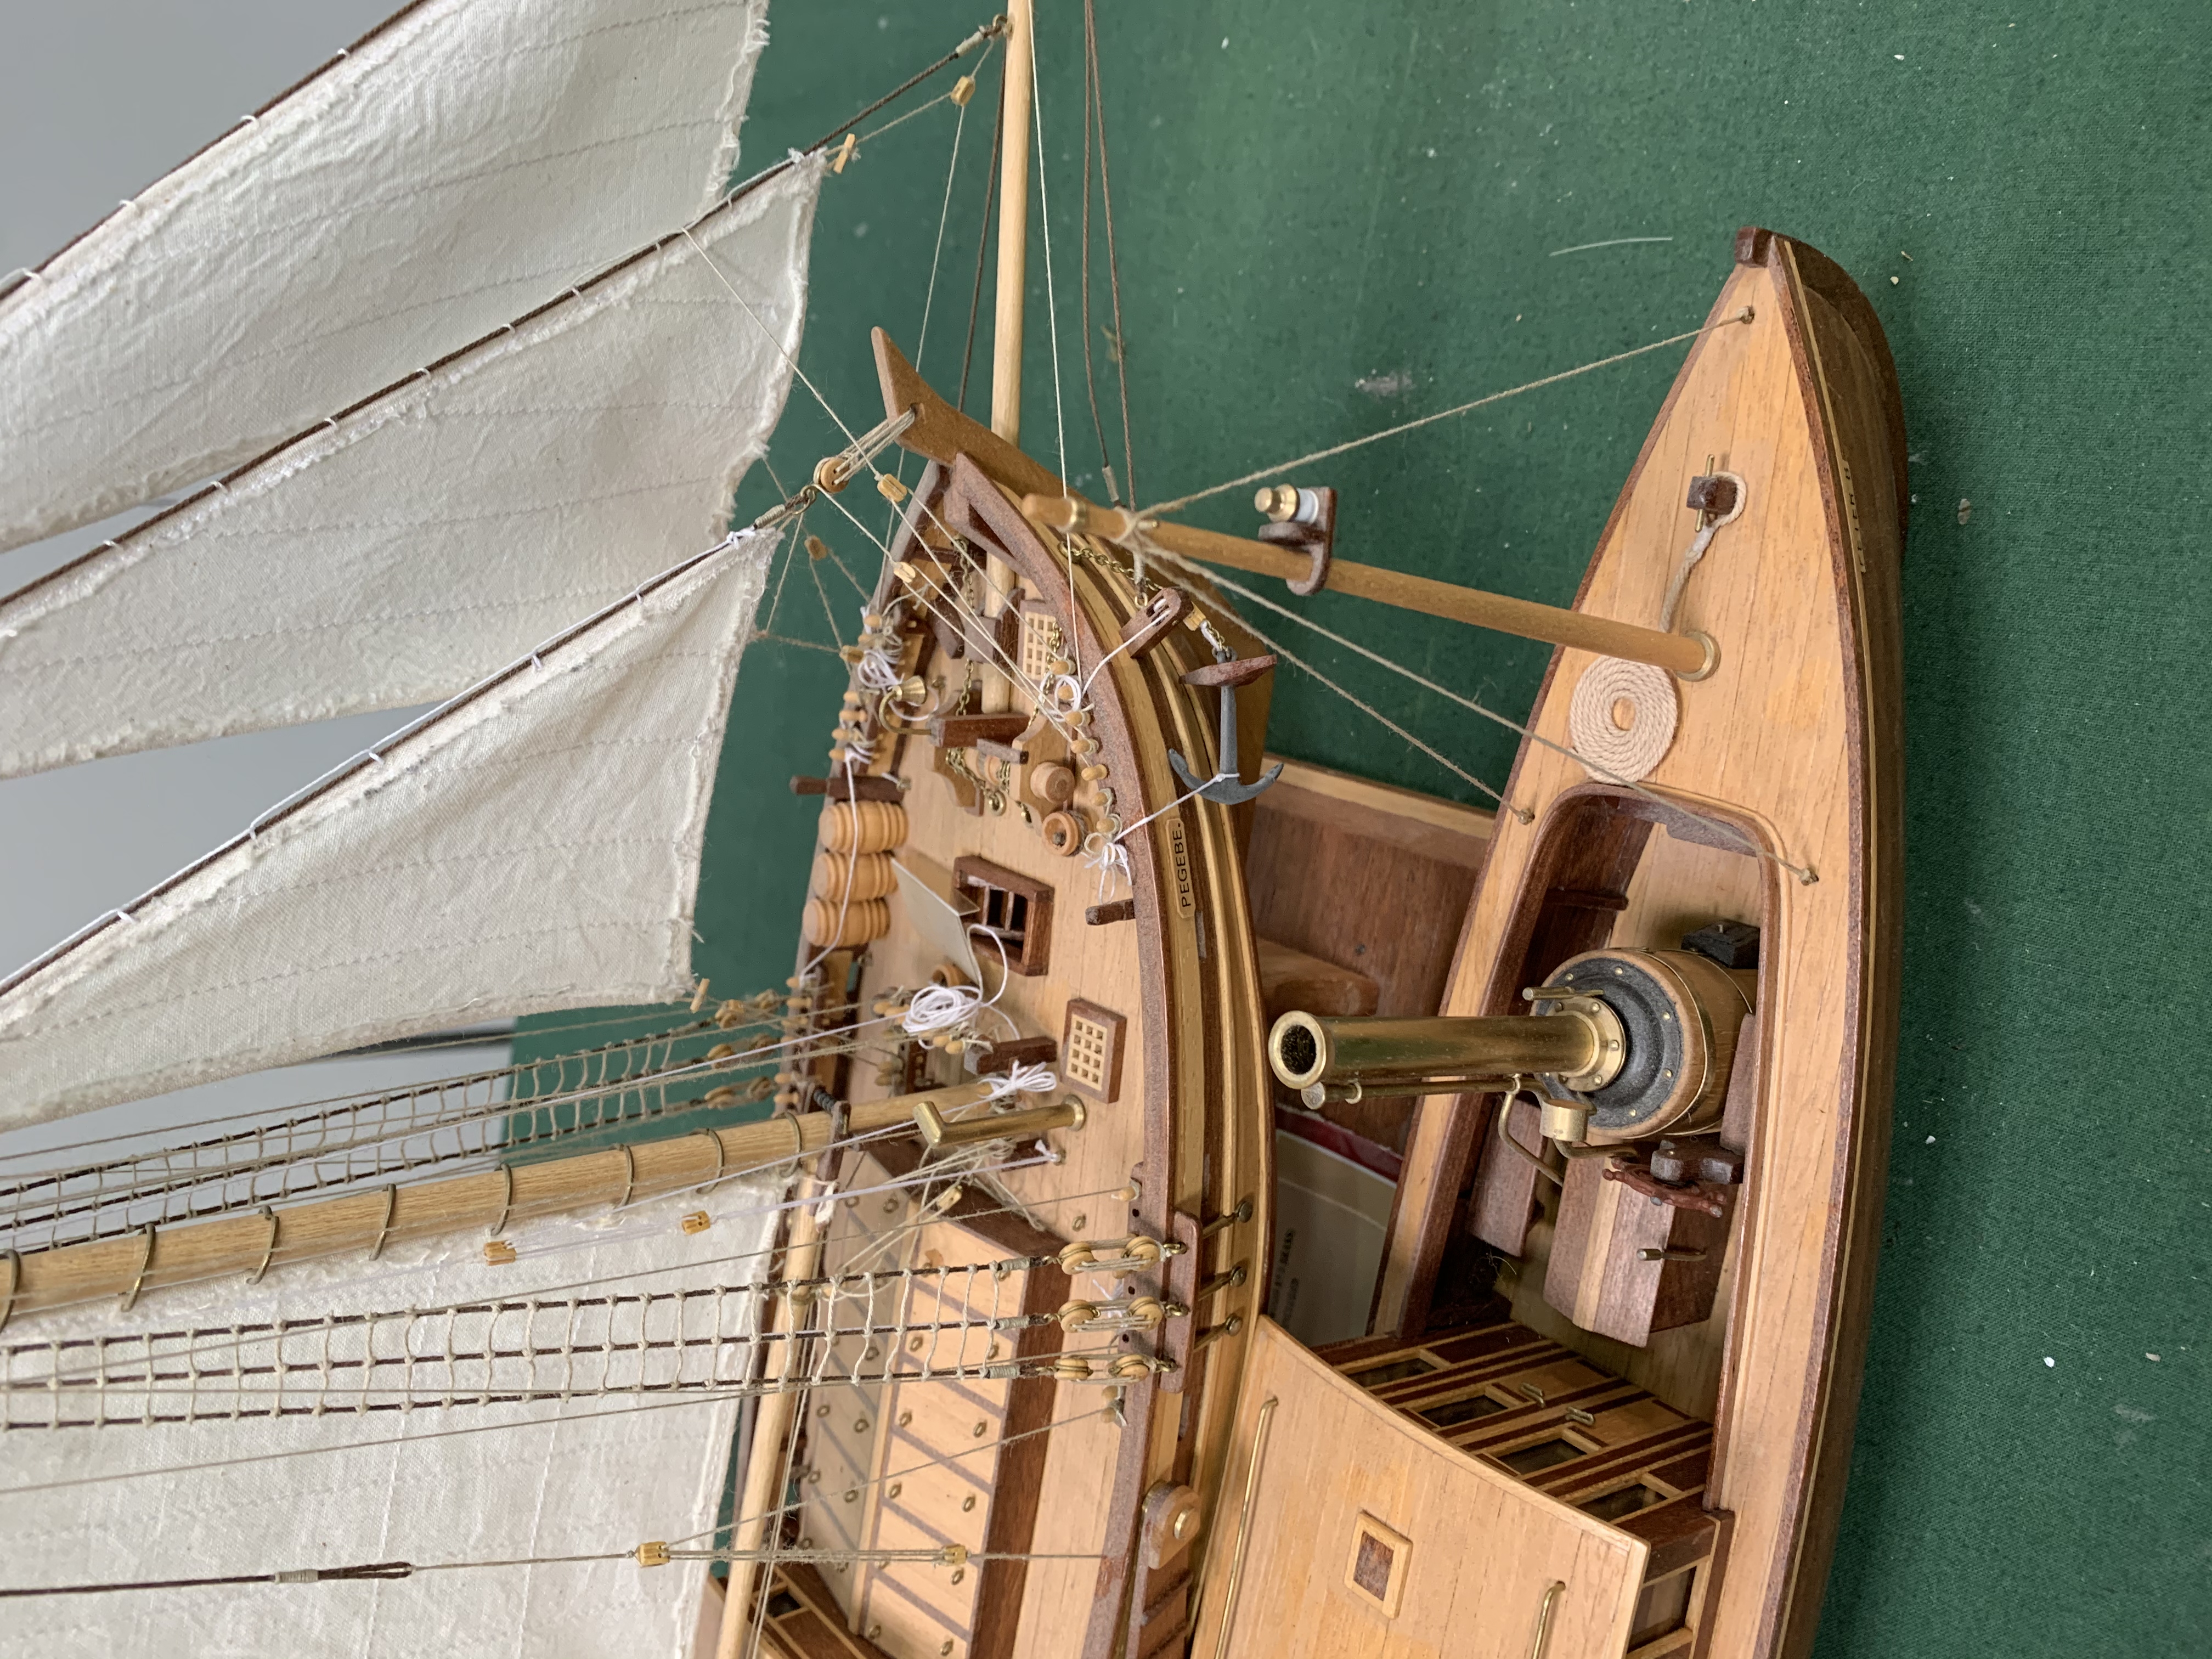 A model of a sailing ship "Pegebe", and a model steam launch.